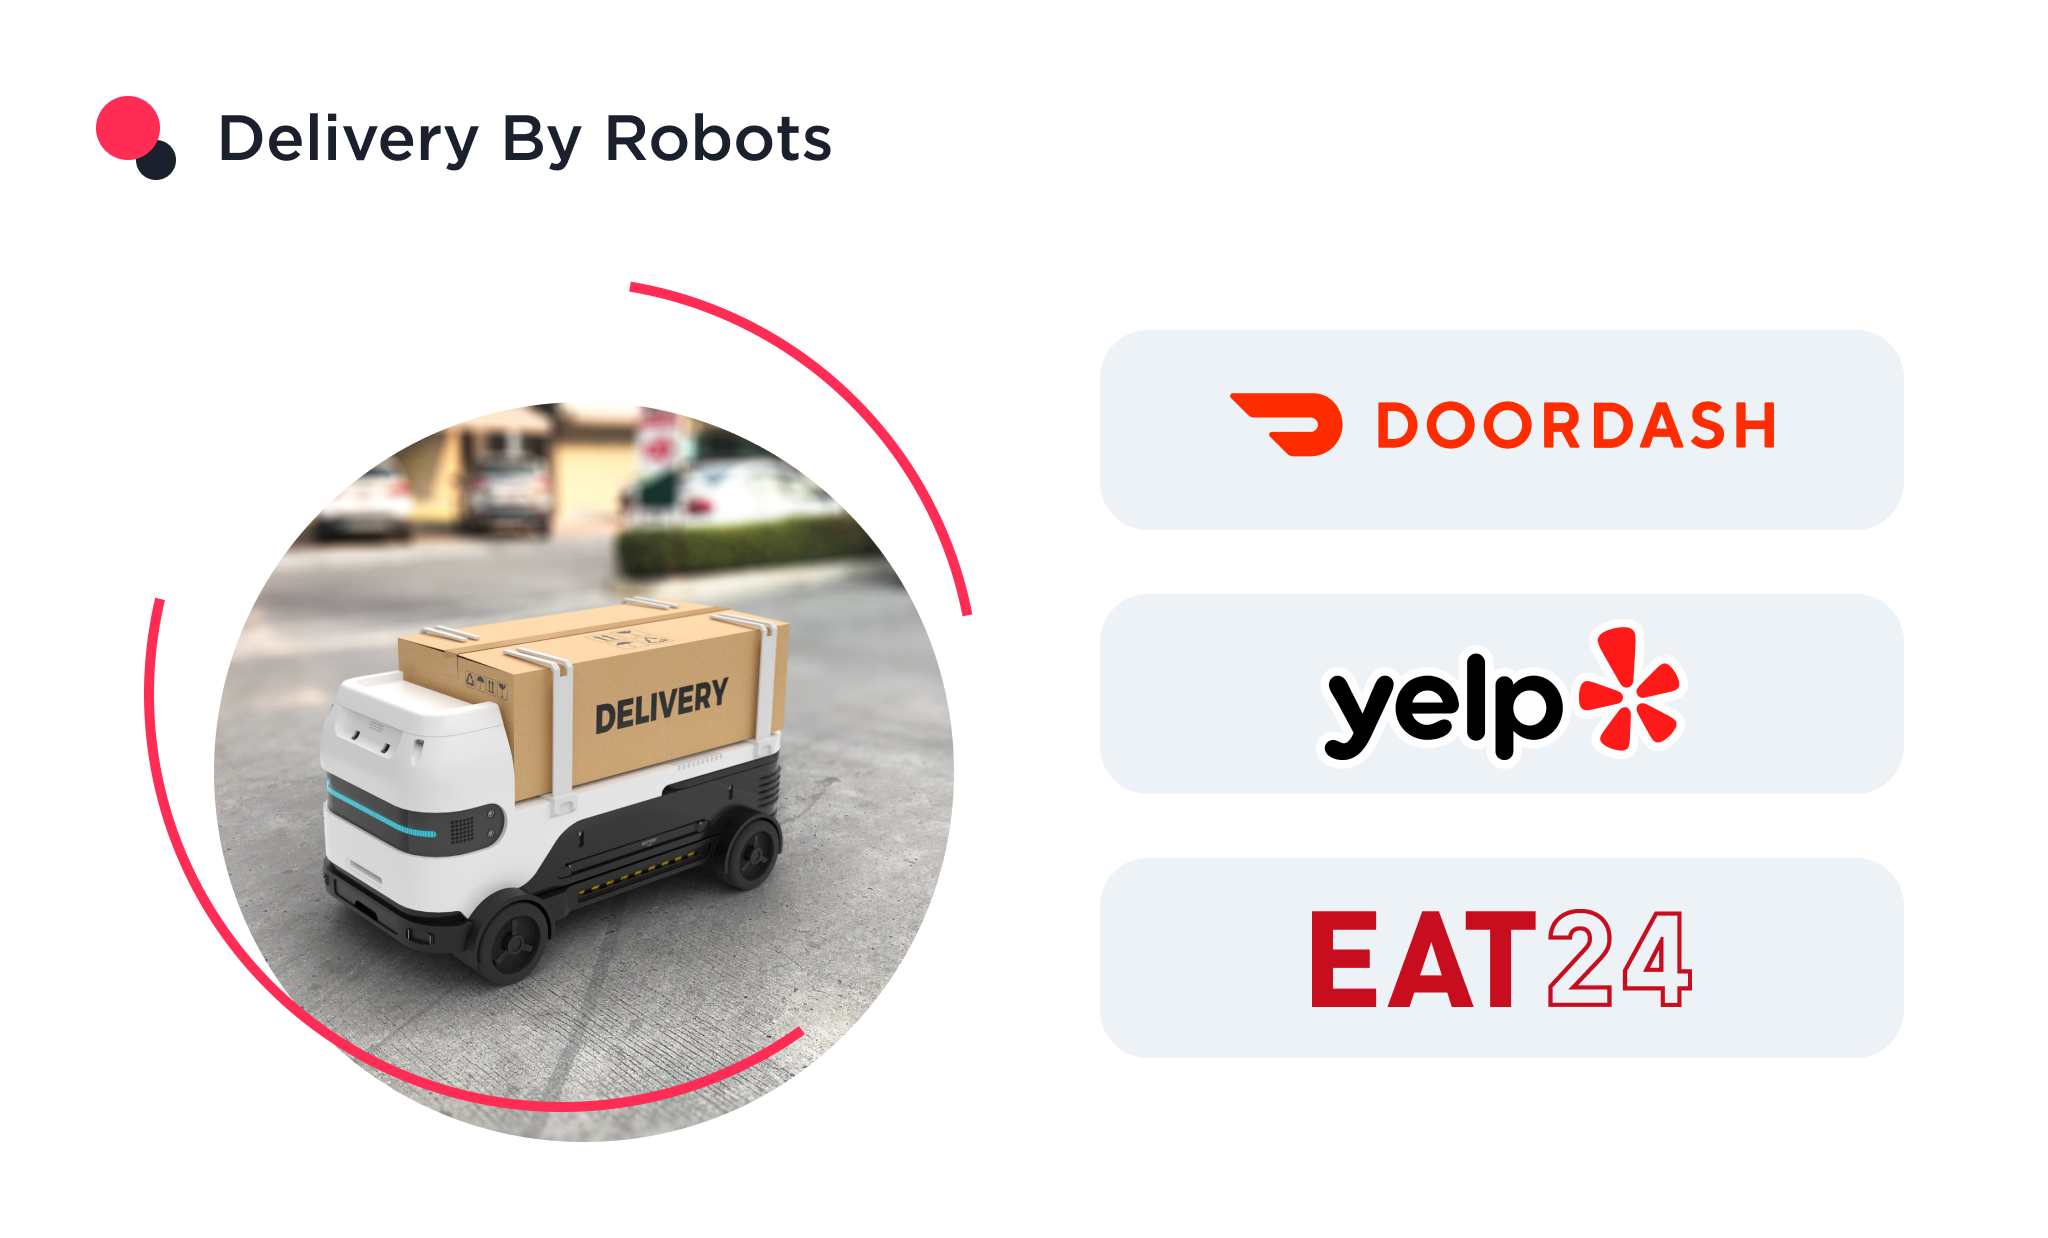 the image shows the food delivery trends such as delivering by robots